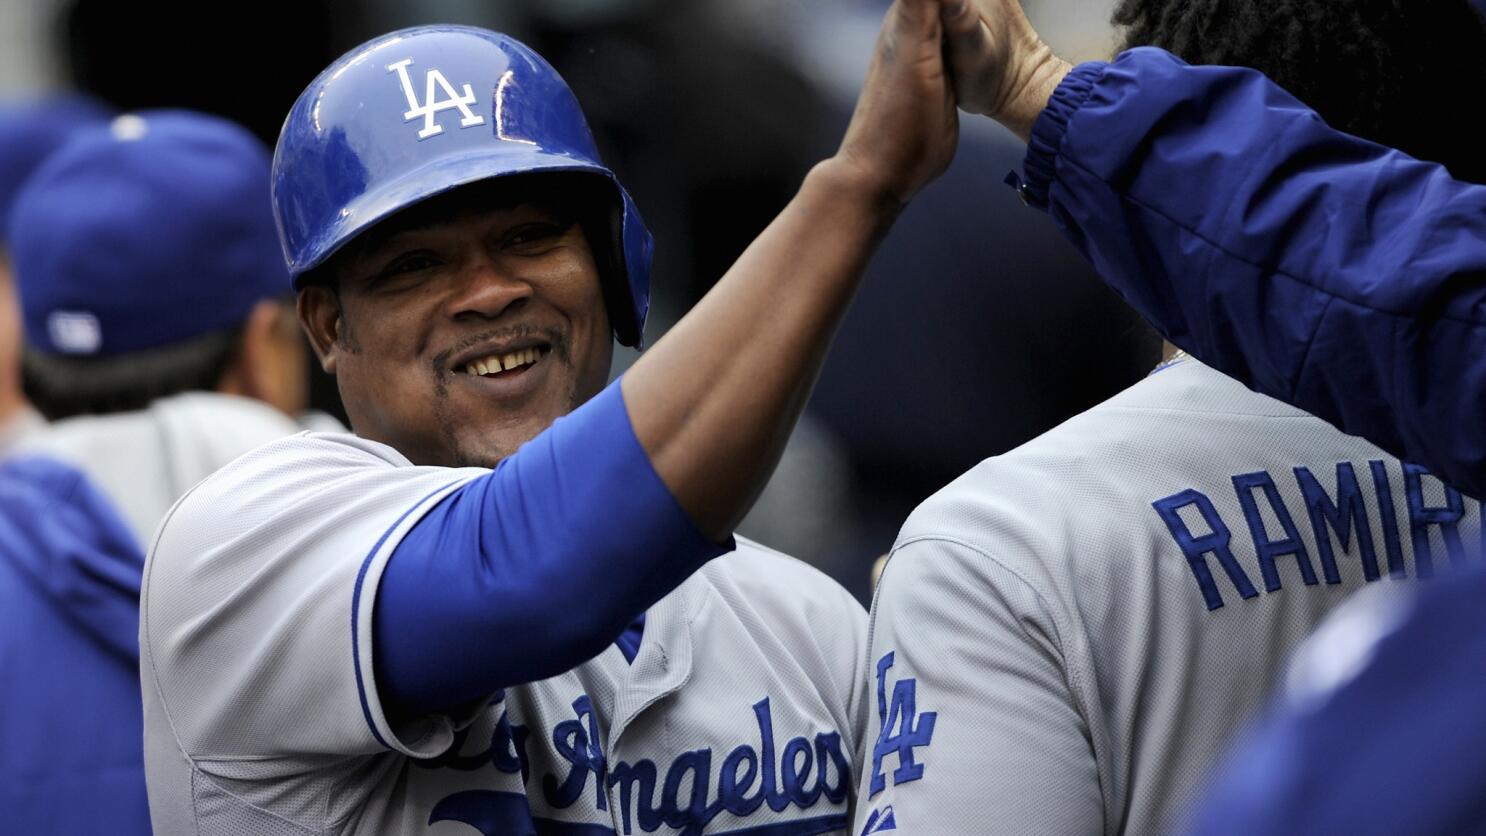 Even on the DL, Juan Uribe keeps Dodgers loose - Los Angeles Times